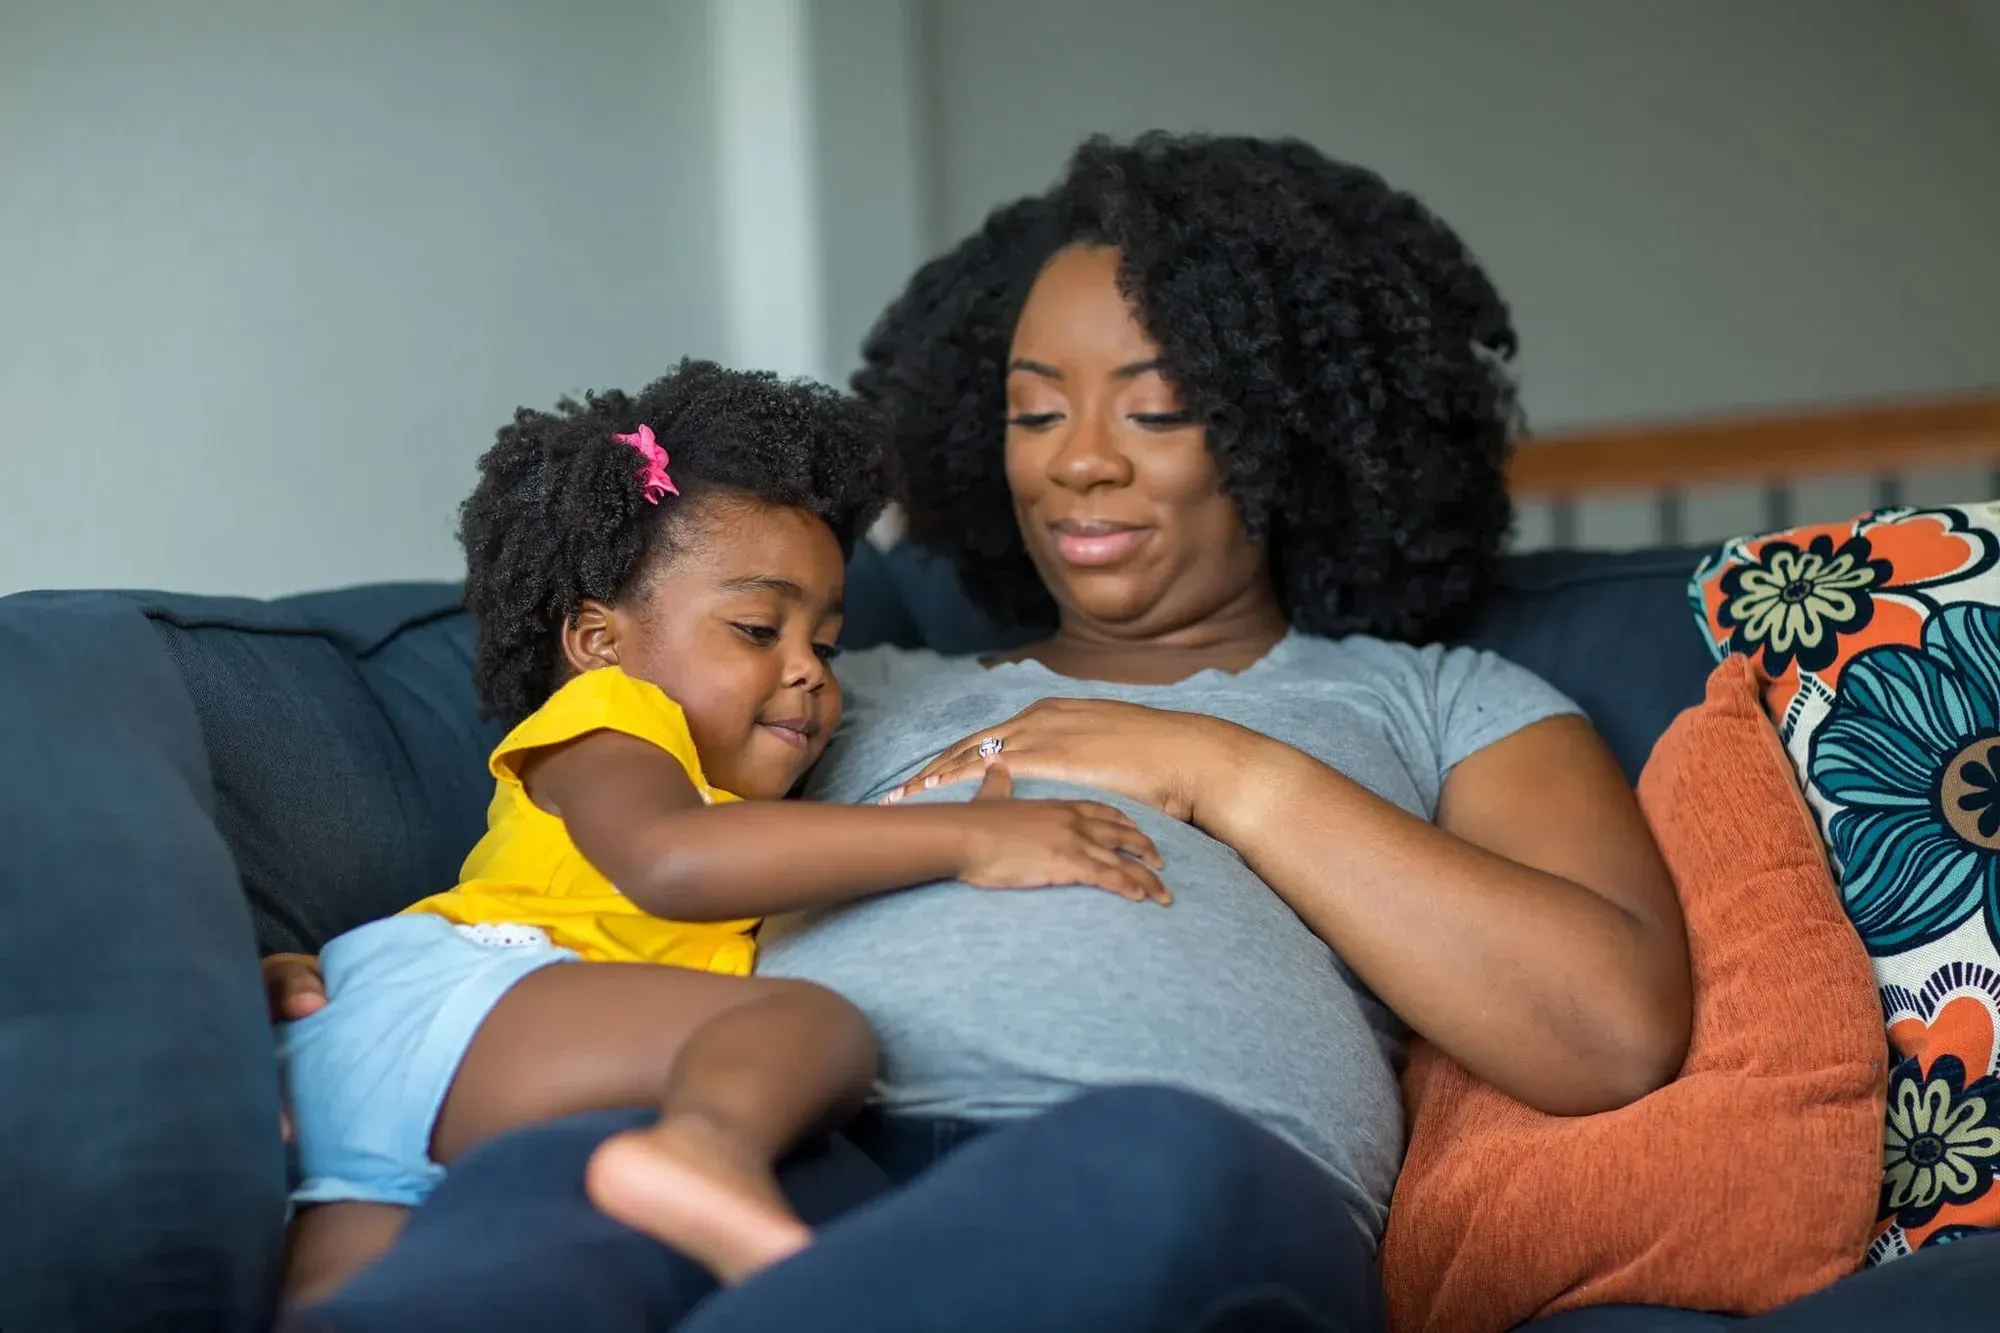 A pregnant mum sitting on the sofa with her toddler, both feeling her tummy. Image